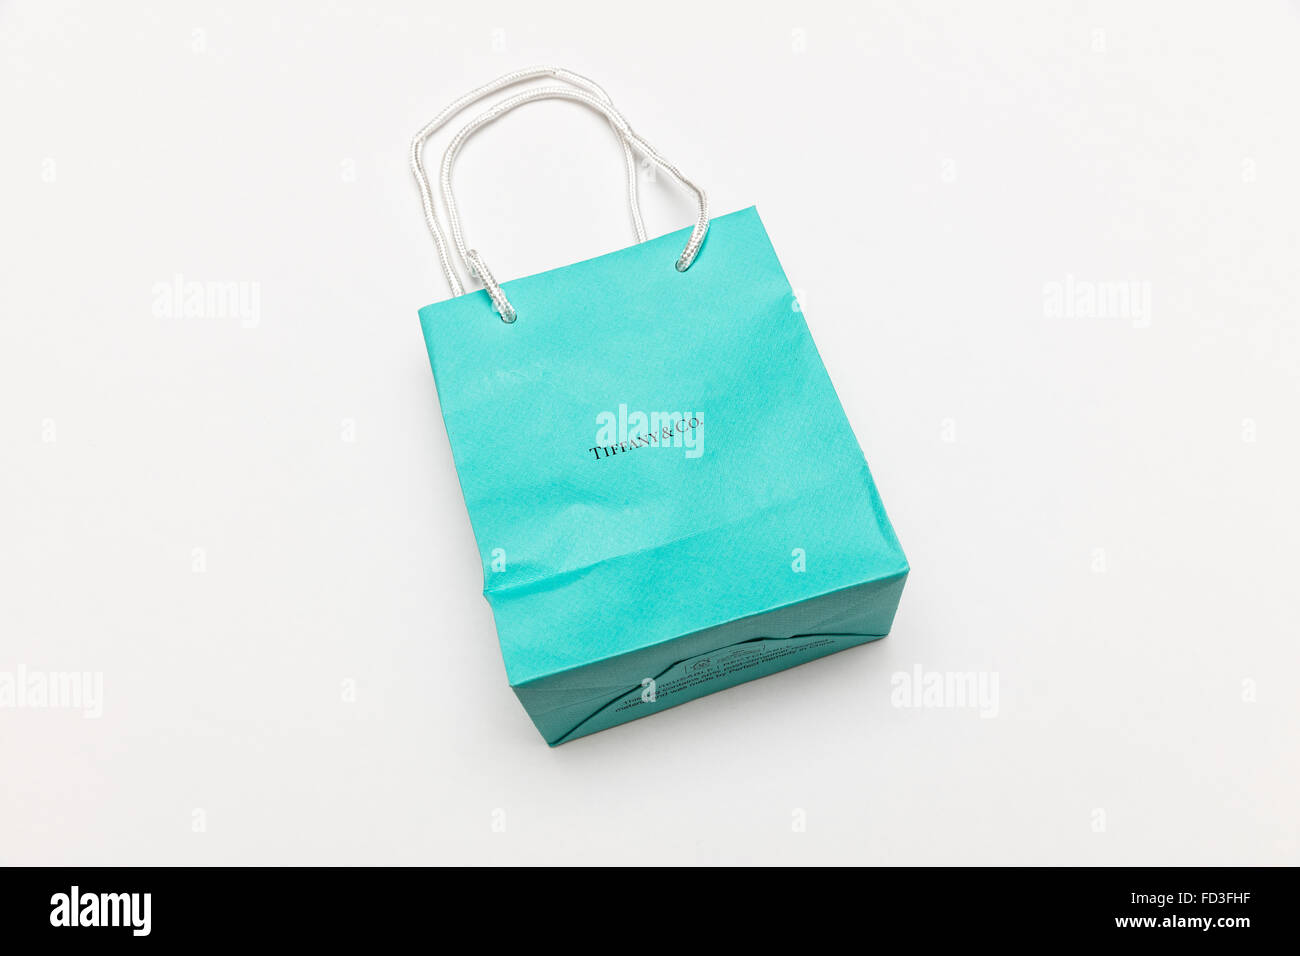 Authentic blue shopping bag from the Tiffany & Co. jewelry store